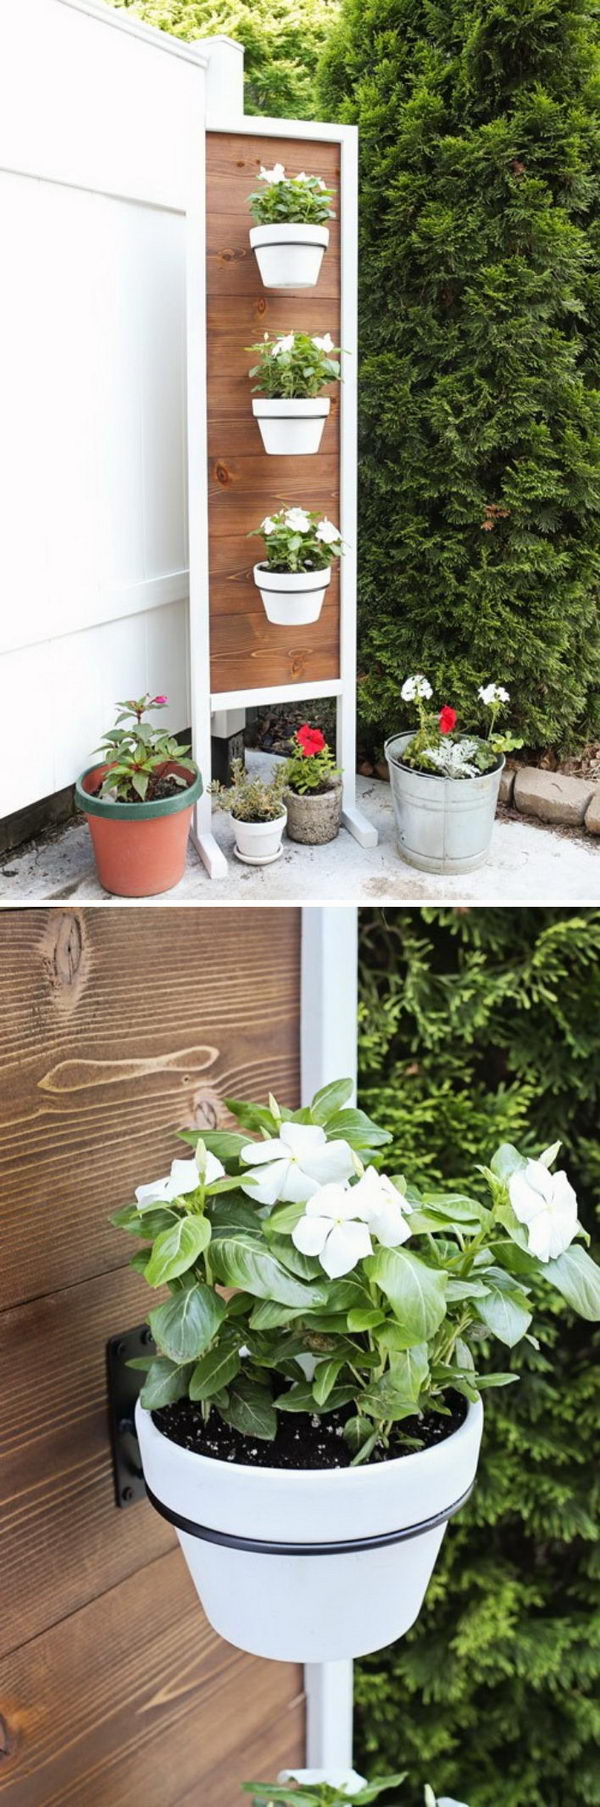 18+ DIY Plant Stands With Thrift Store Finds   Hative